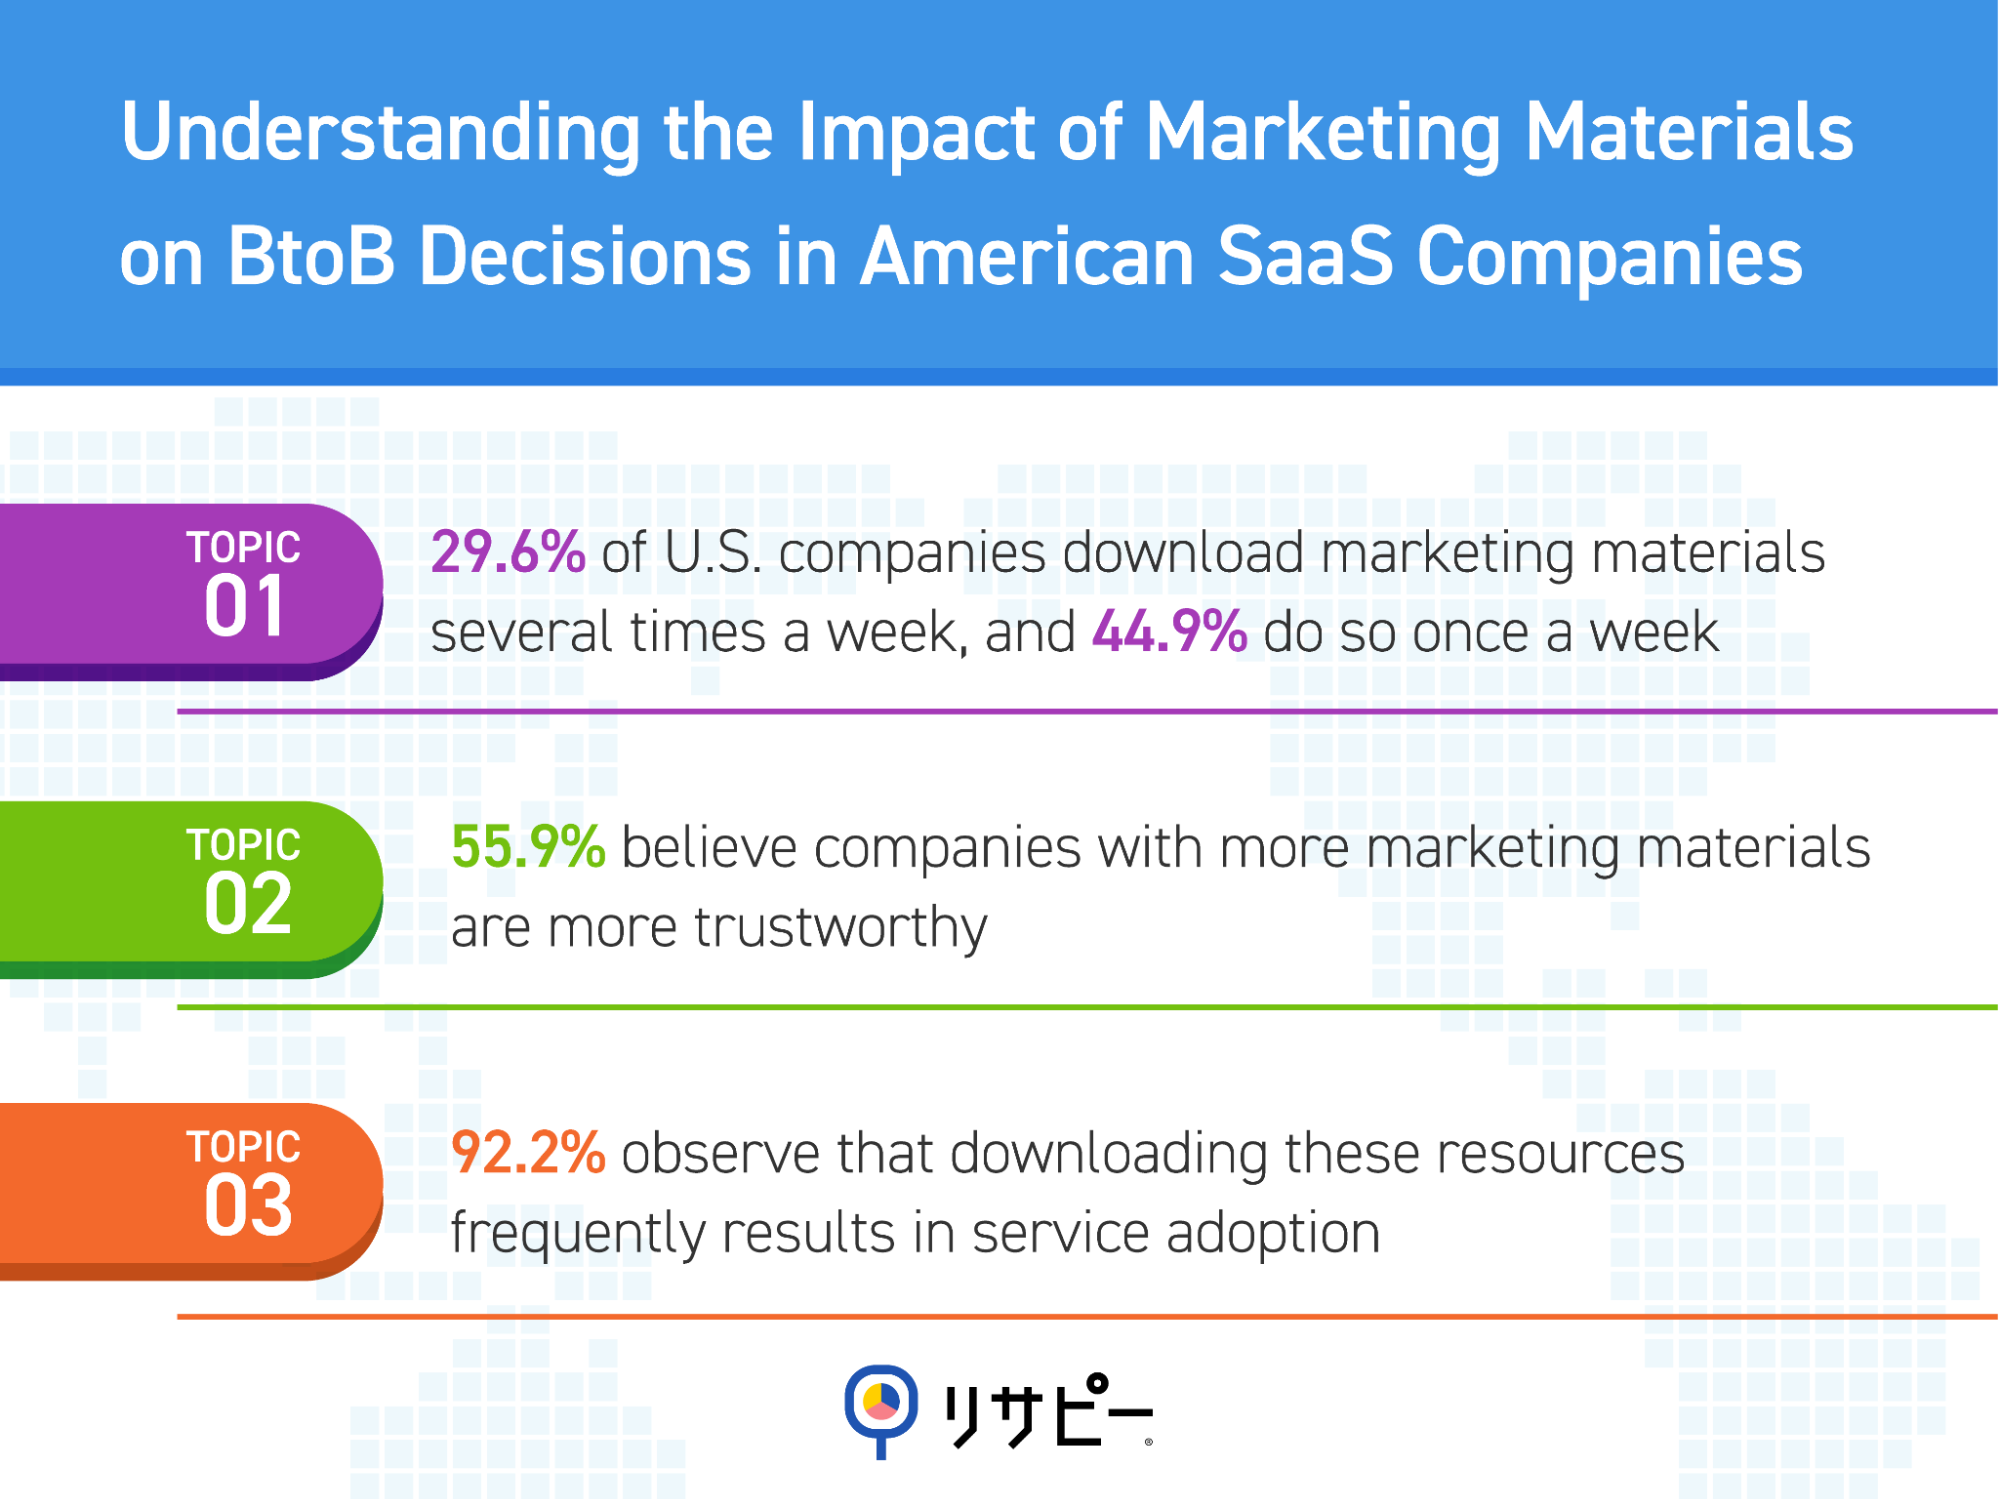 IDEATECH Survey: Impact of Marketing Materials on IT Service Purchases in U.S. BtoB Companies